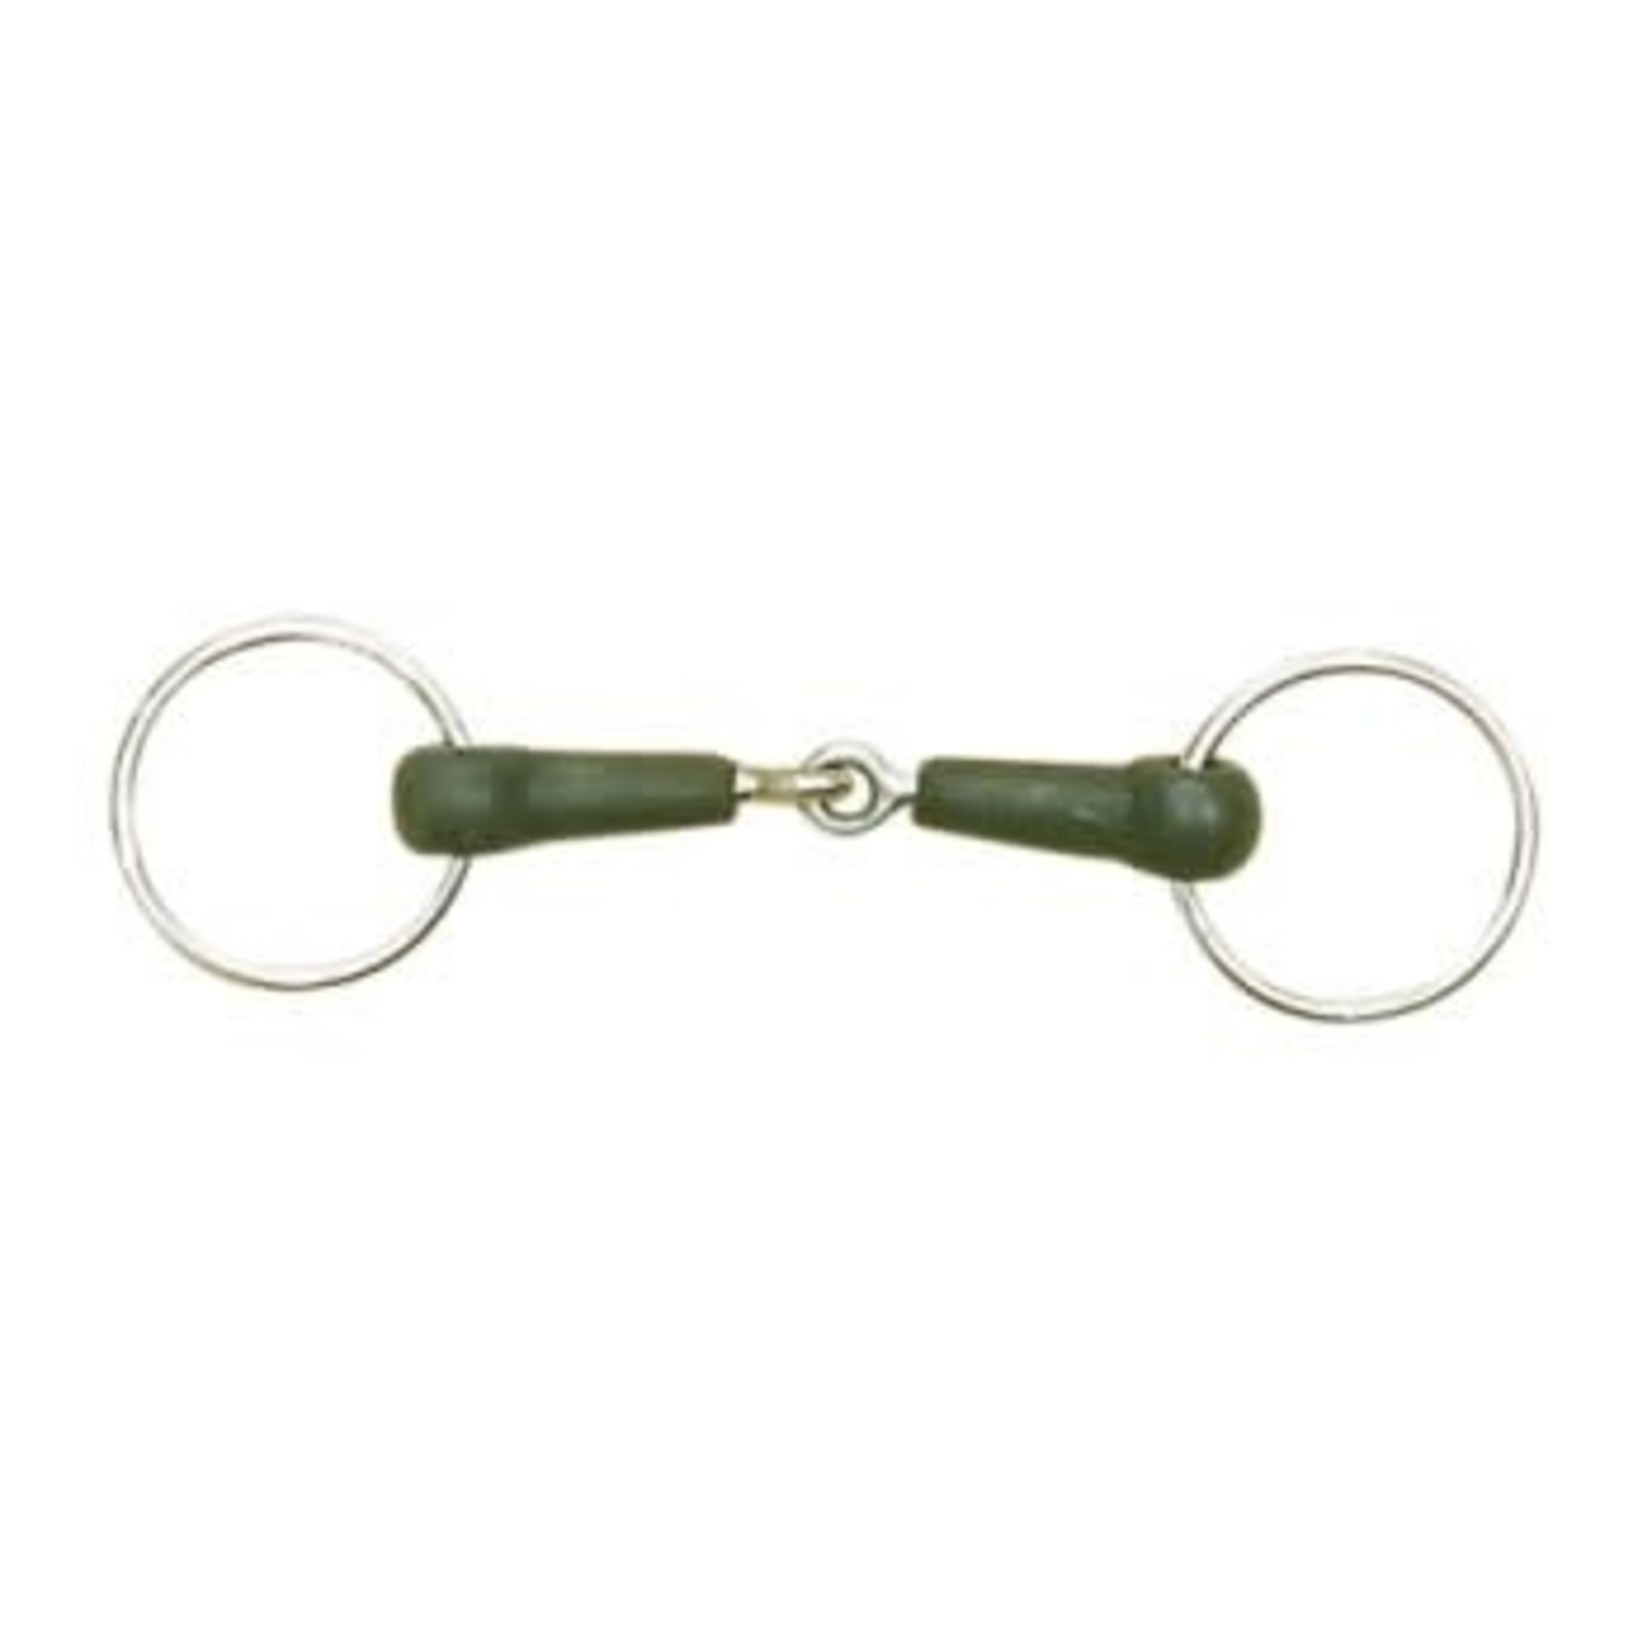 Cavalier Soft Rubber Mouth Loose Ring Snaffle